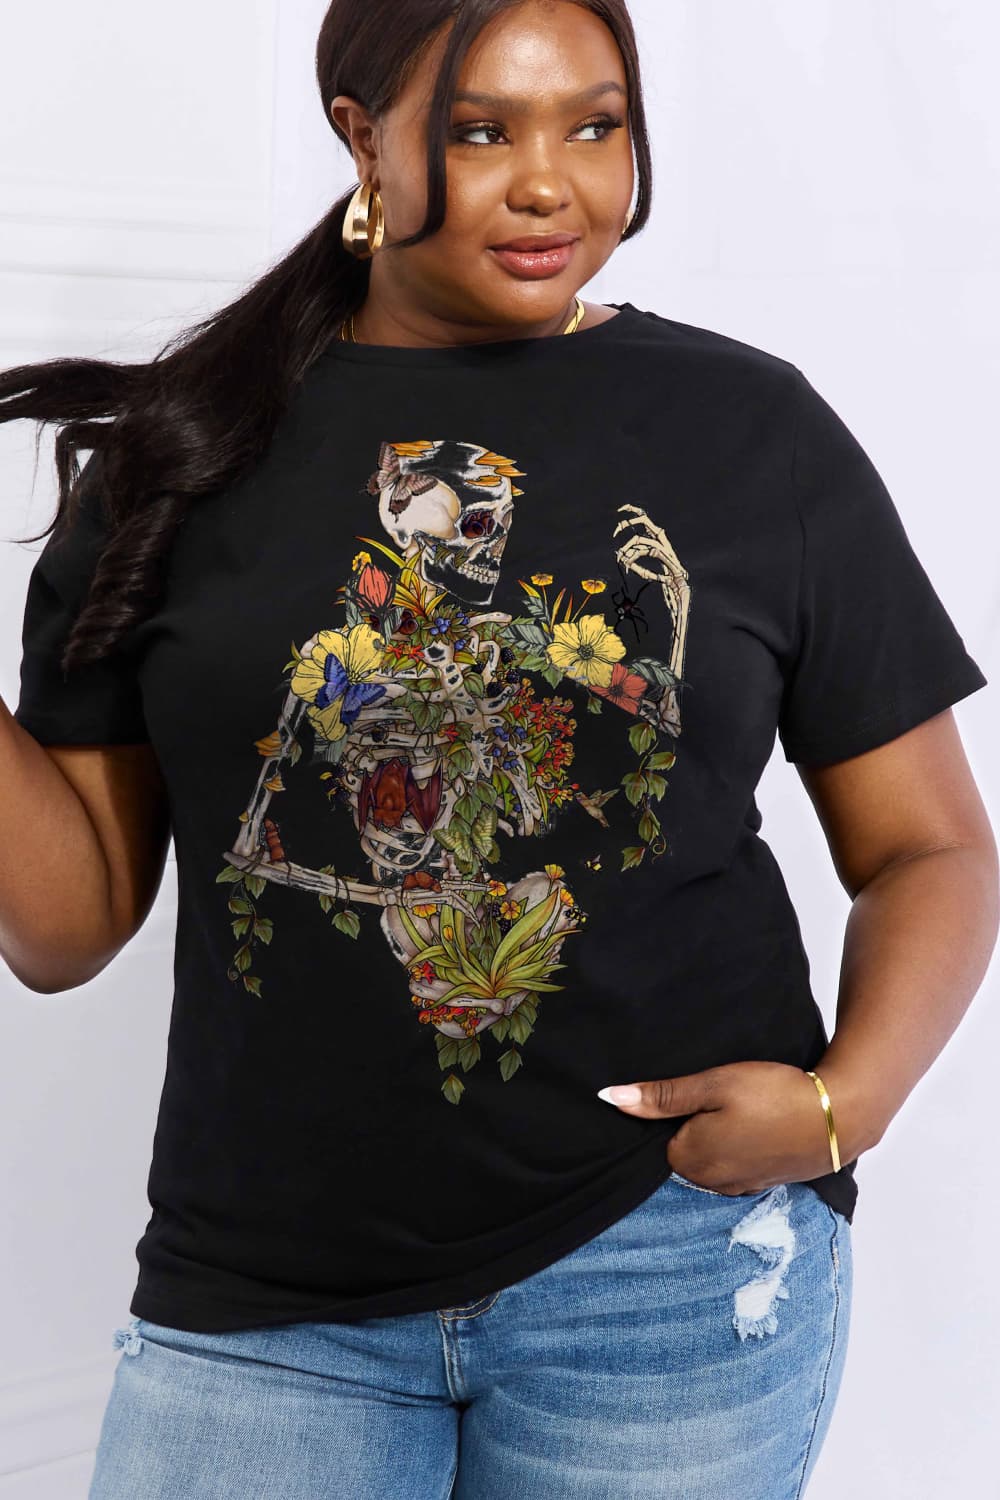 Full Size Skeleton Graphic Cotton Tee - T-Shirts - Shirts & Tops - 8 - 2024